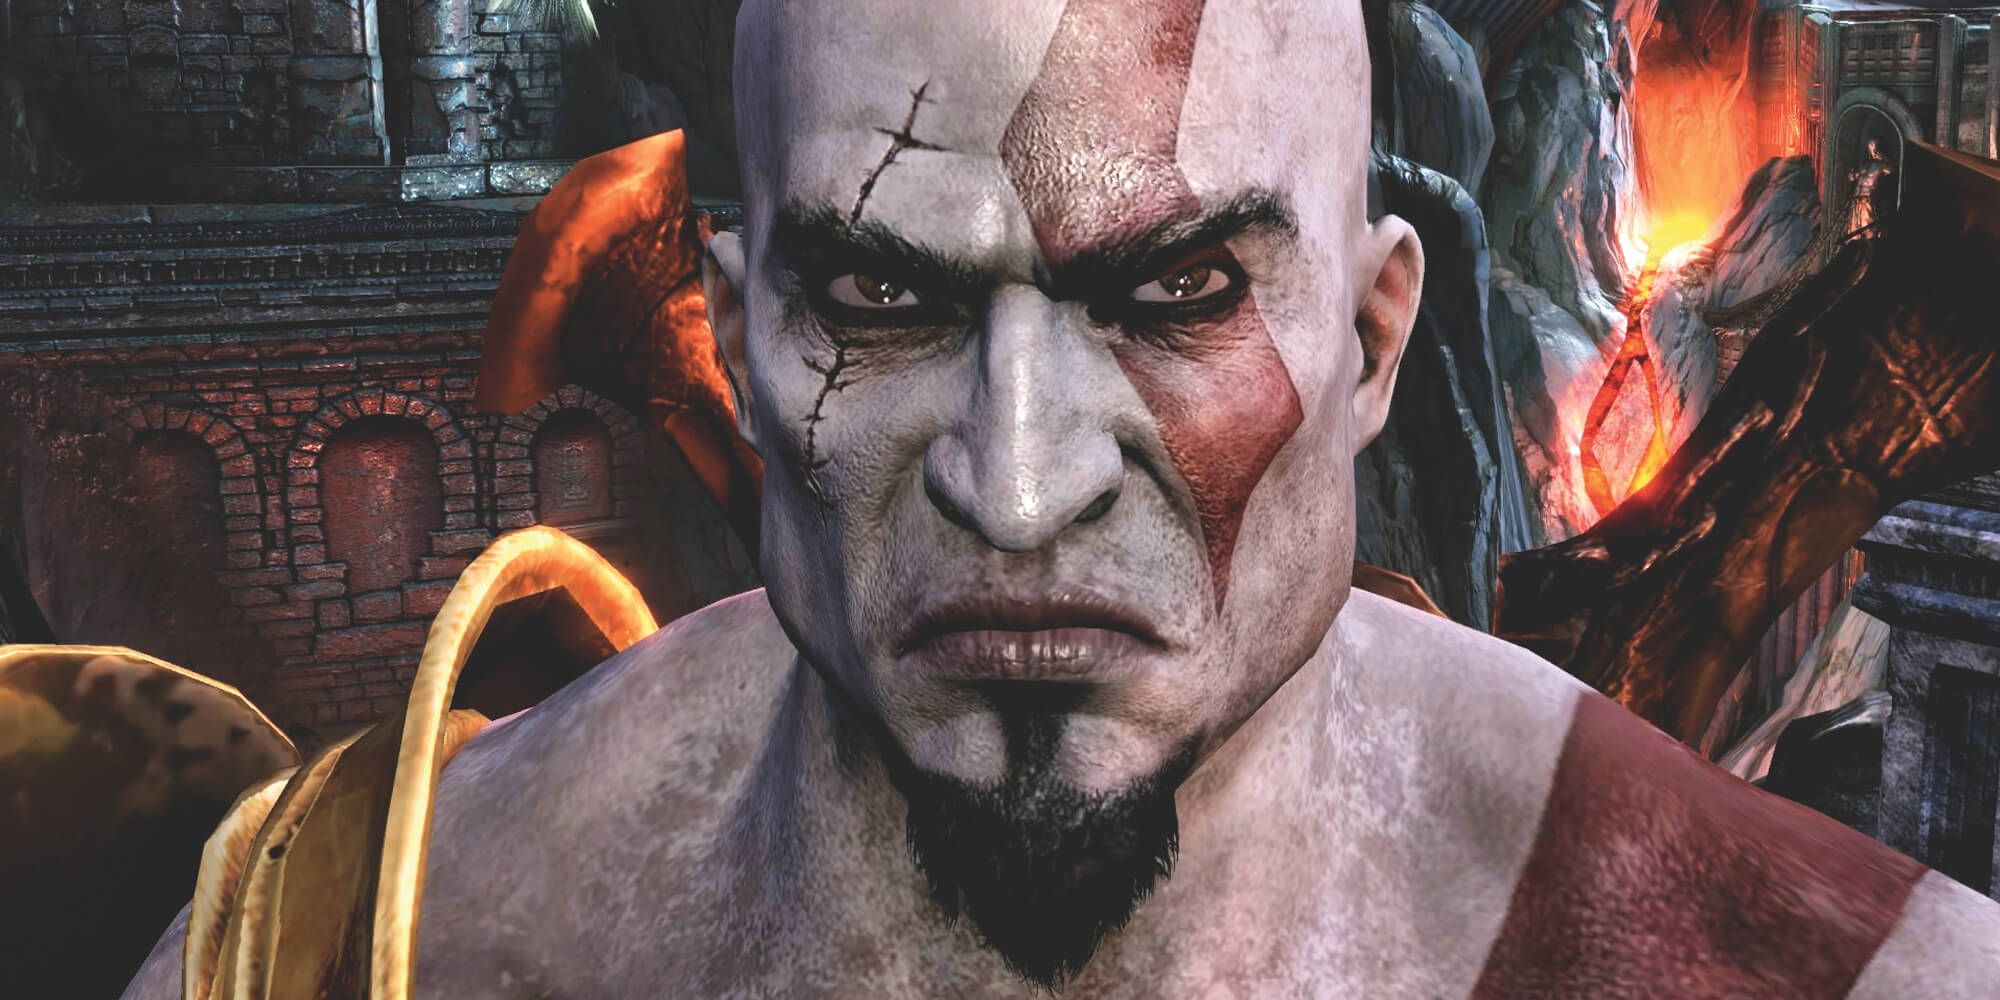 God of War 3 looks glorious at 8K + ray tracing + Mythic Mod